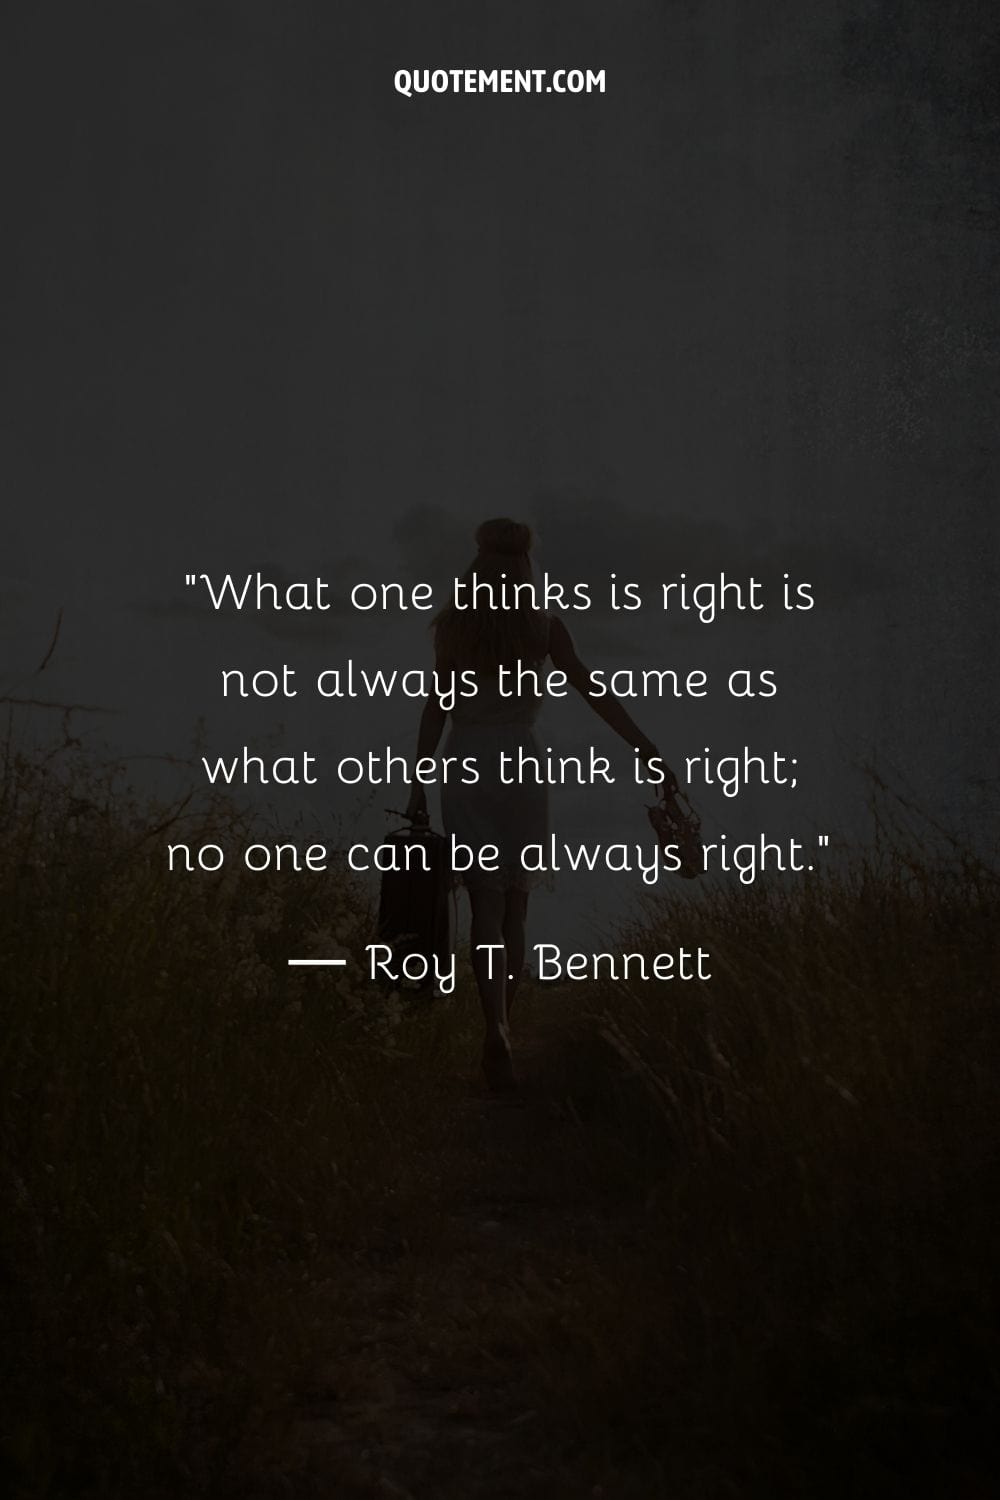 What one thinks is right is not always the same as what others think is right